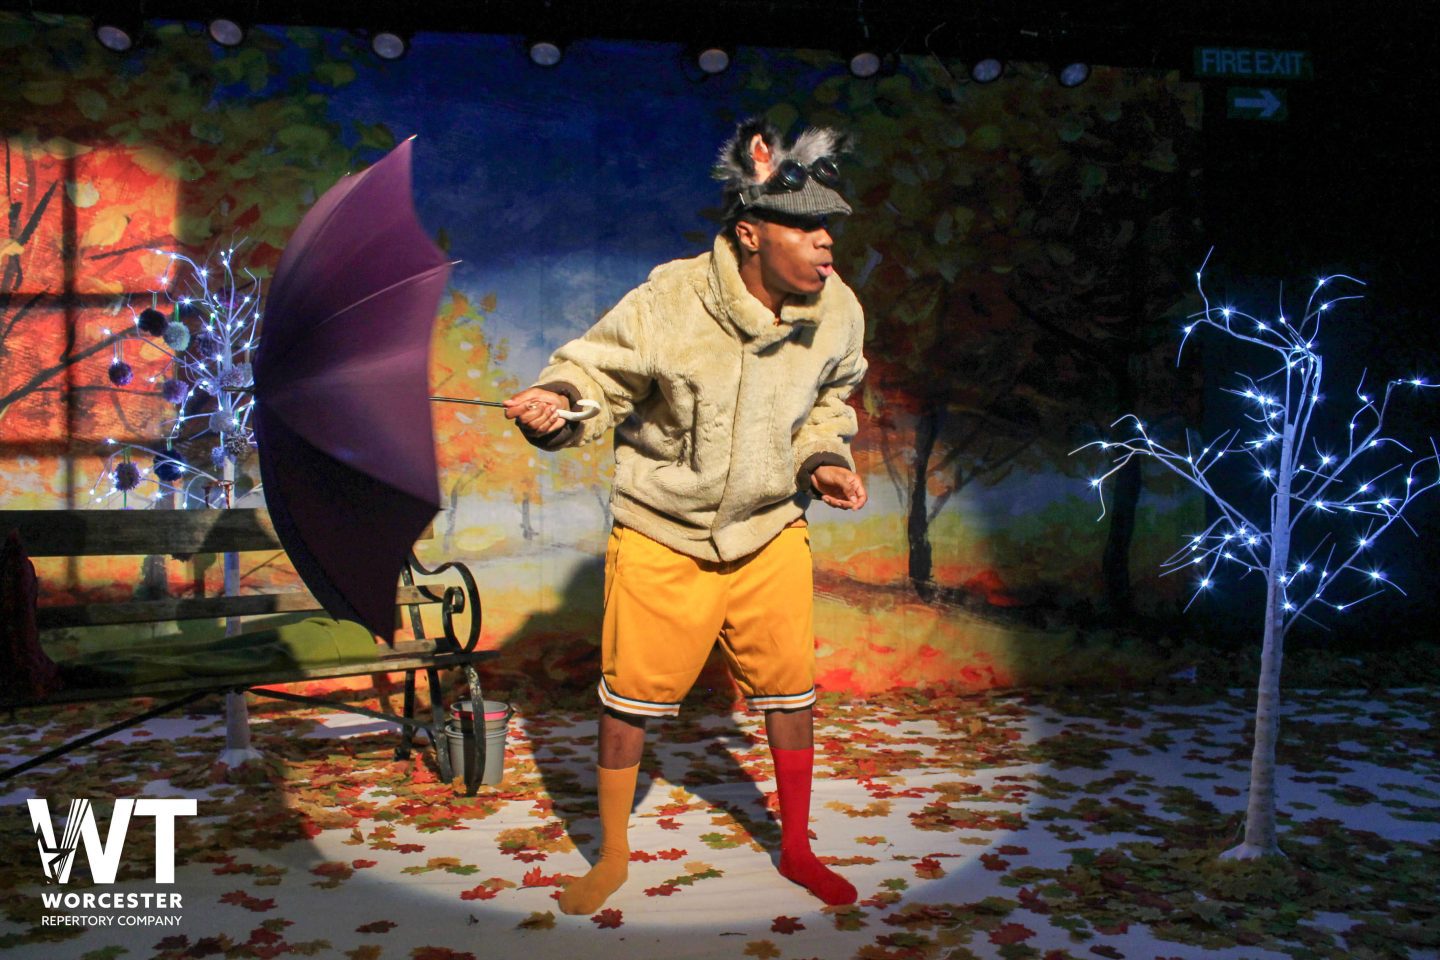 The Big Bad Wolf from Little Red Riding Hood on stage at The Swan Theatre Worcester